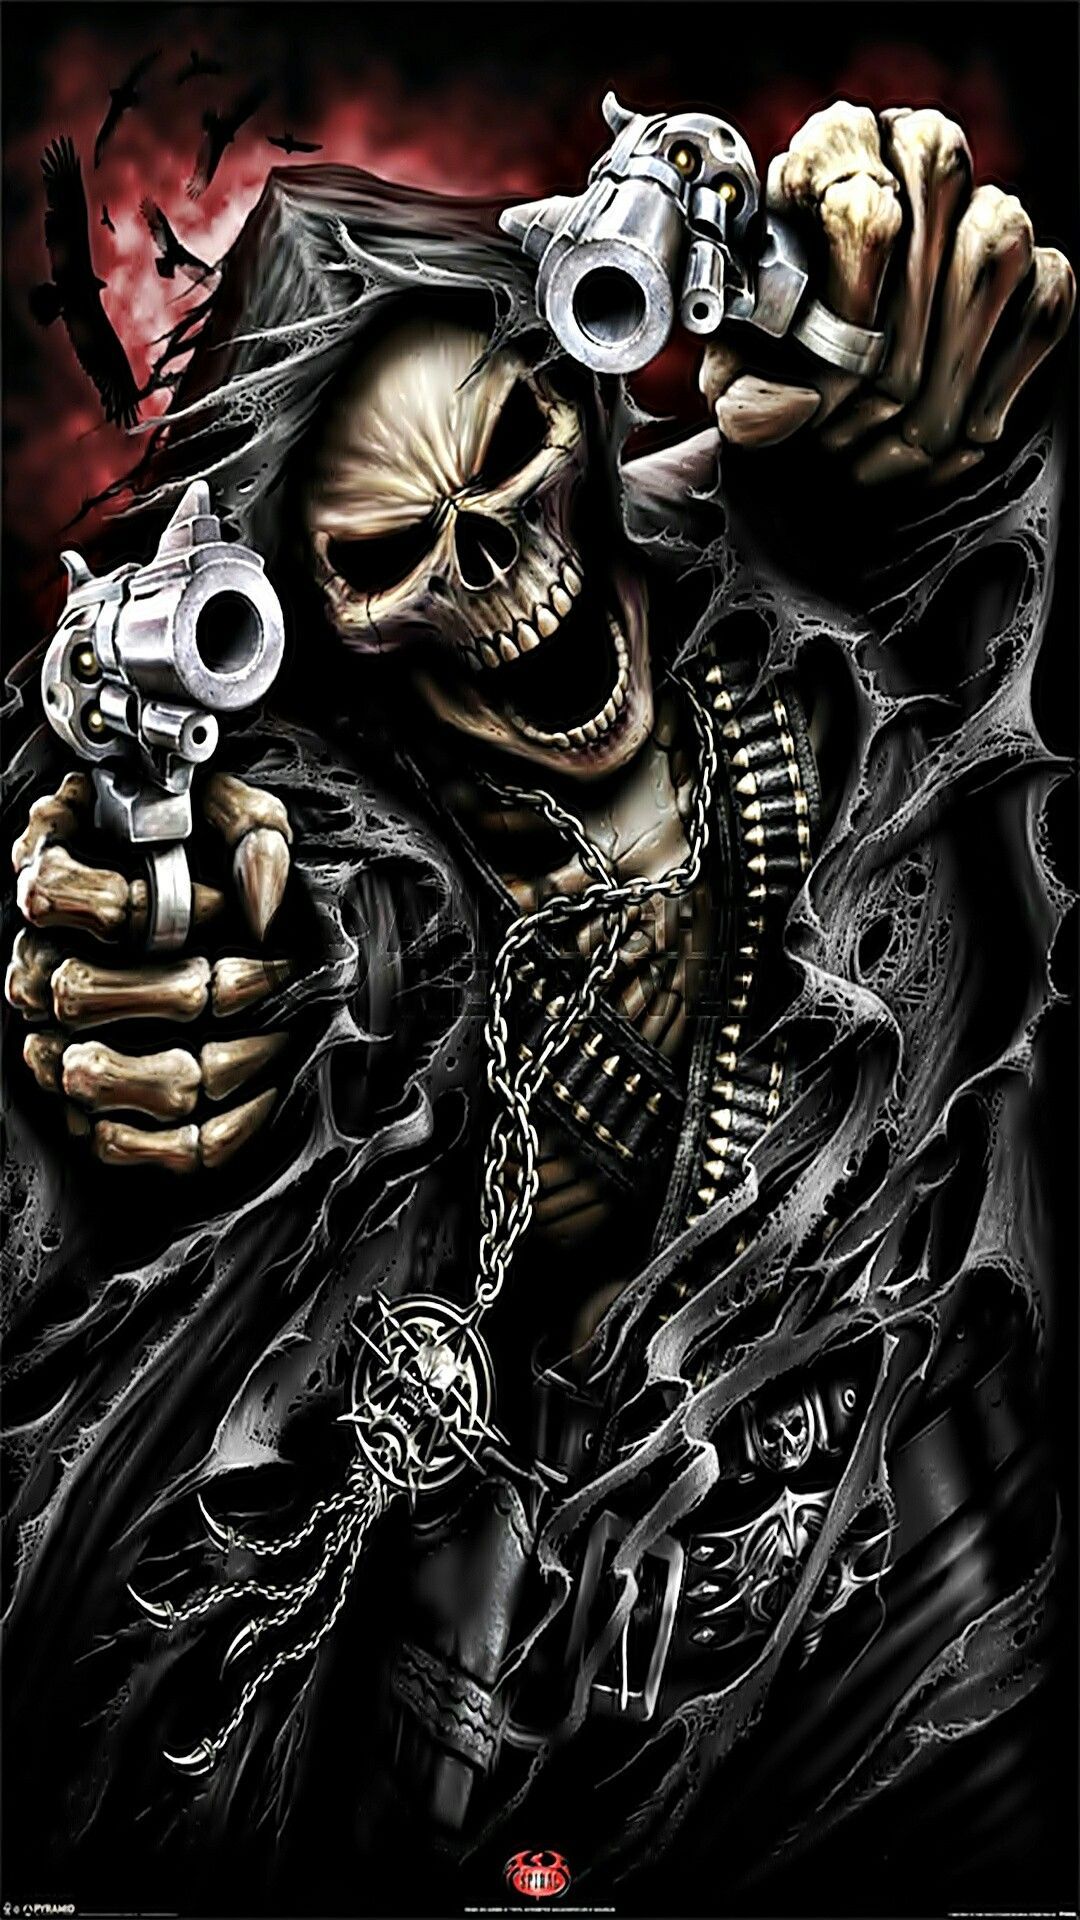 97 *Skeleton, Clowns, Guns, Animals and Scary Wallpapers ideas.